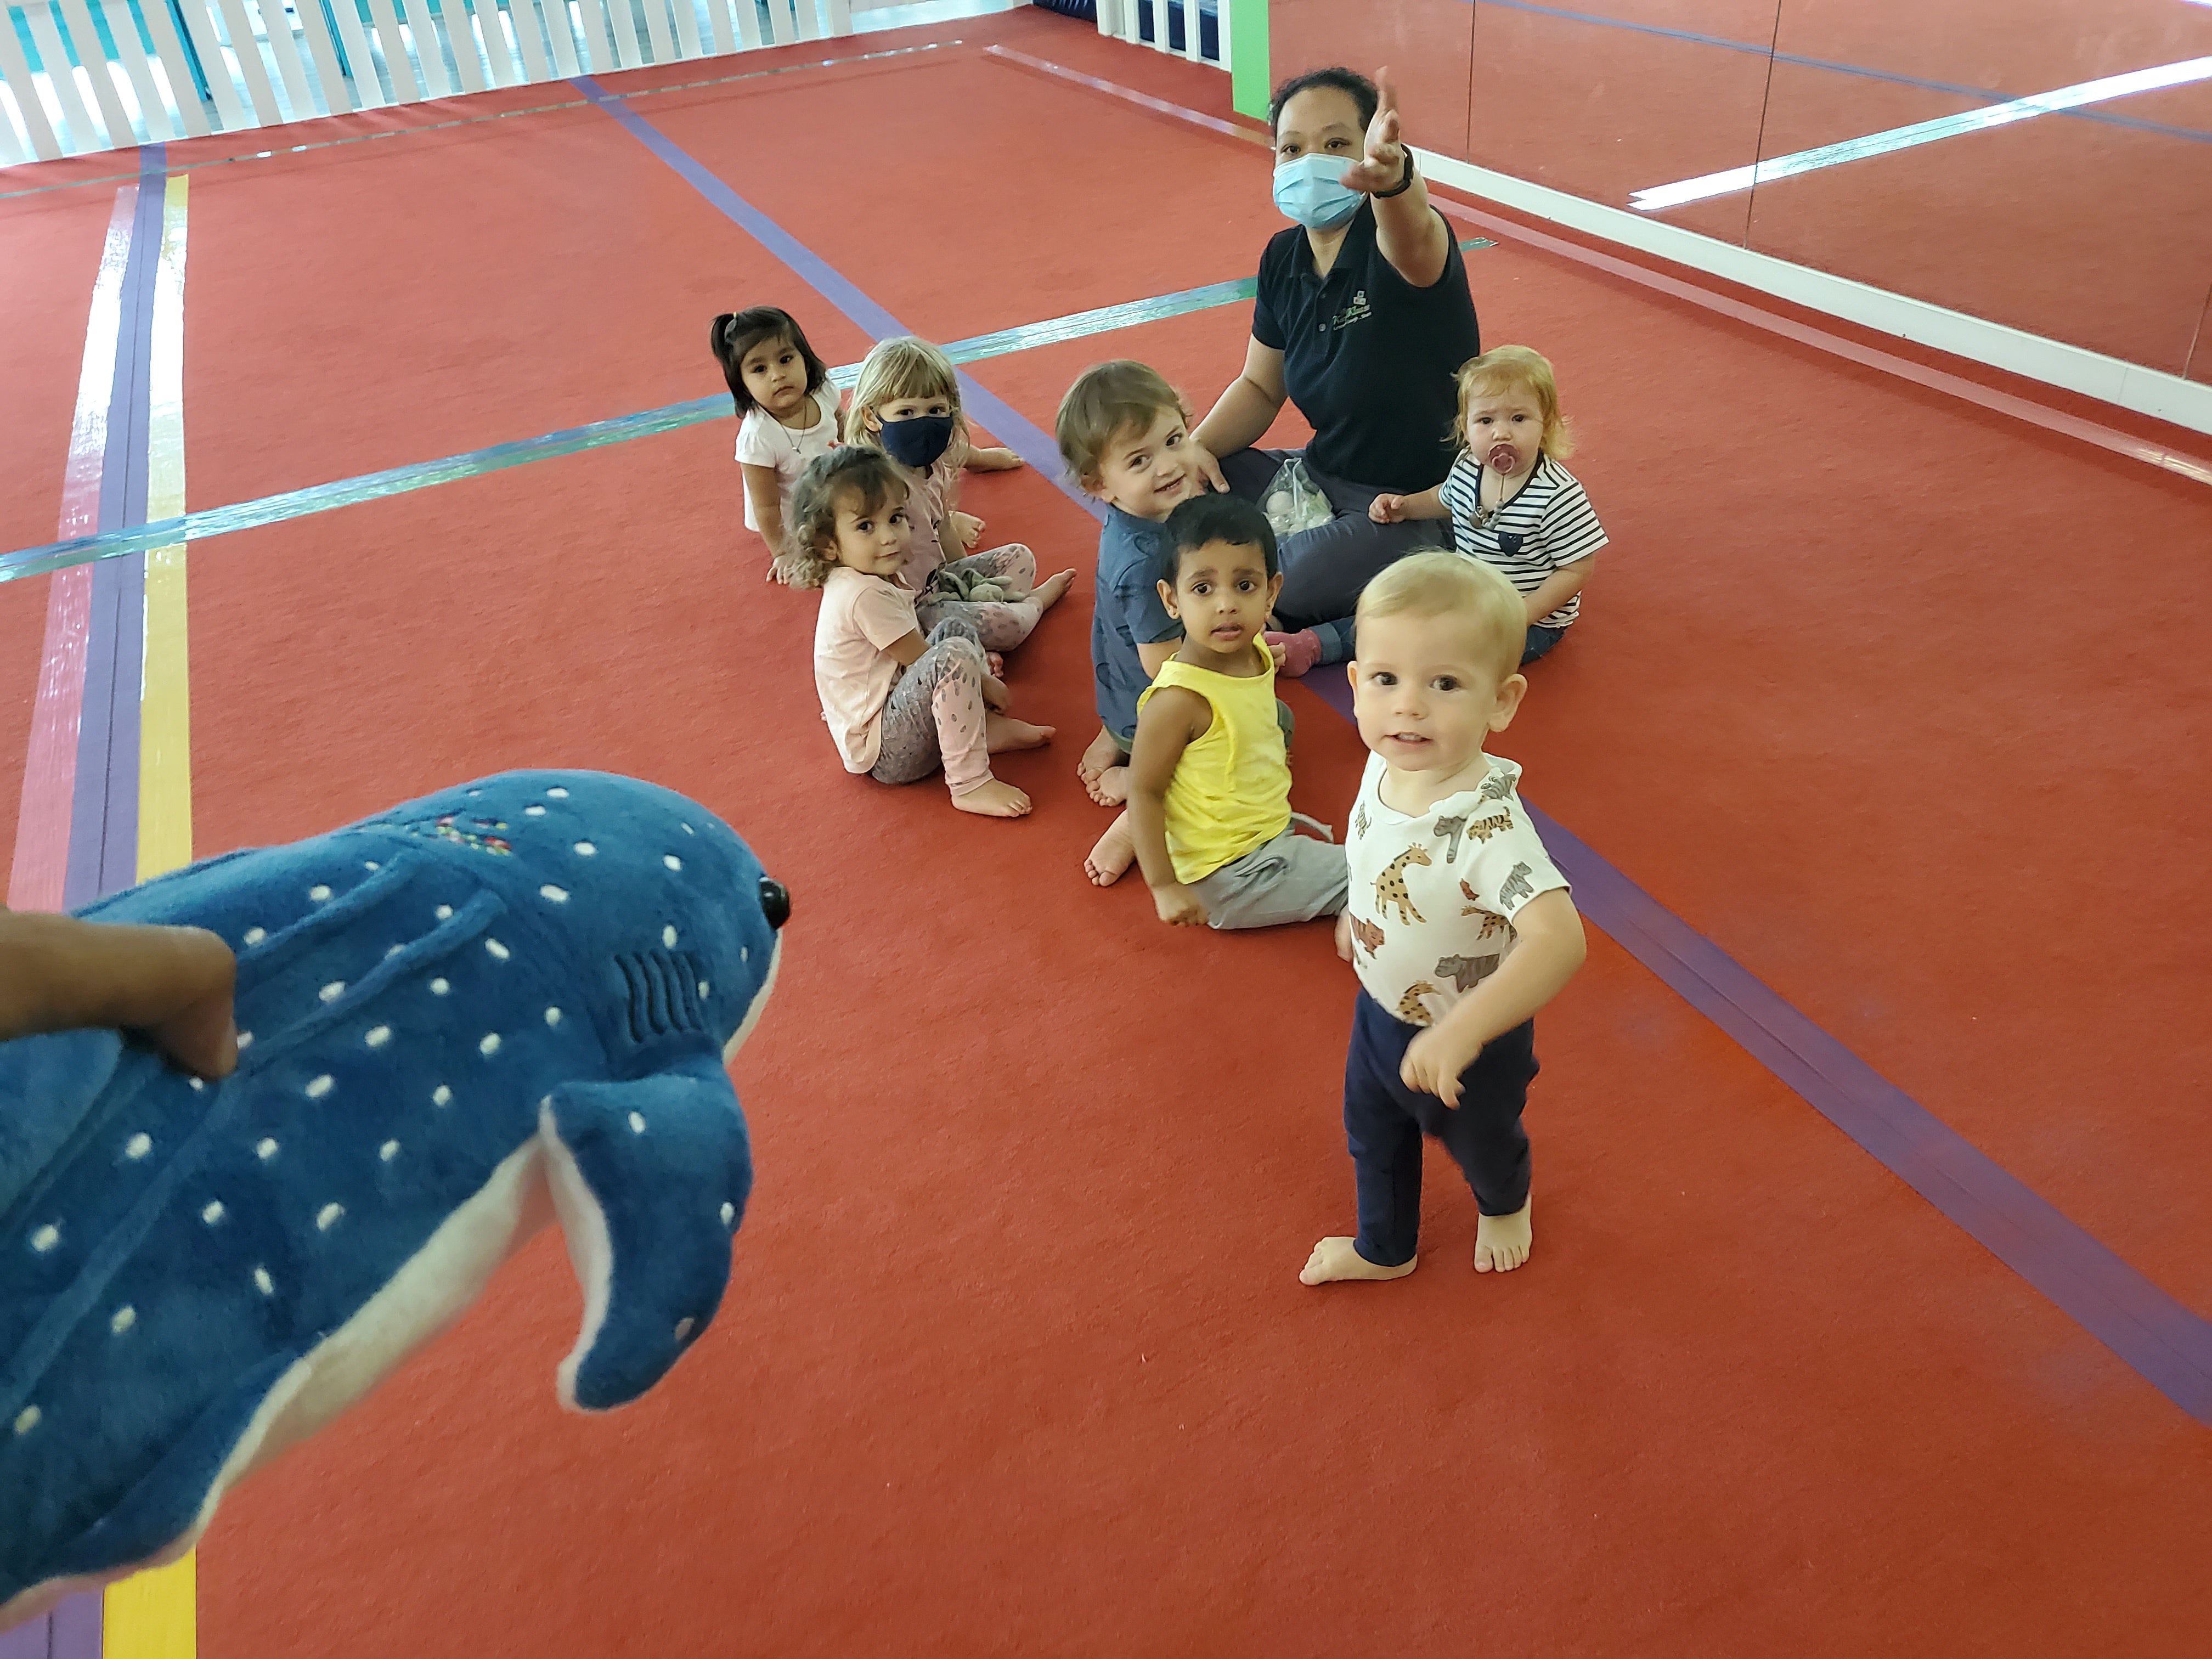 Kinder Klasse: Open Gym Session for 7 Months to 7 Years Old